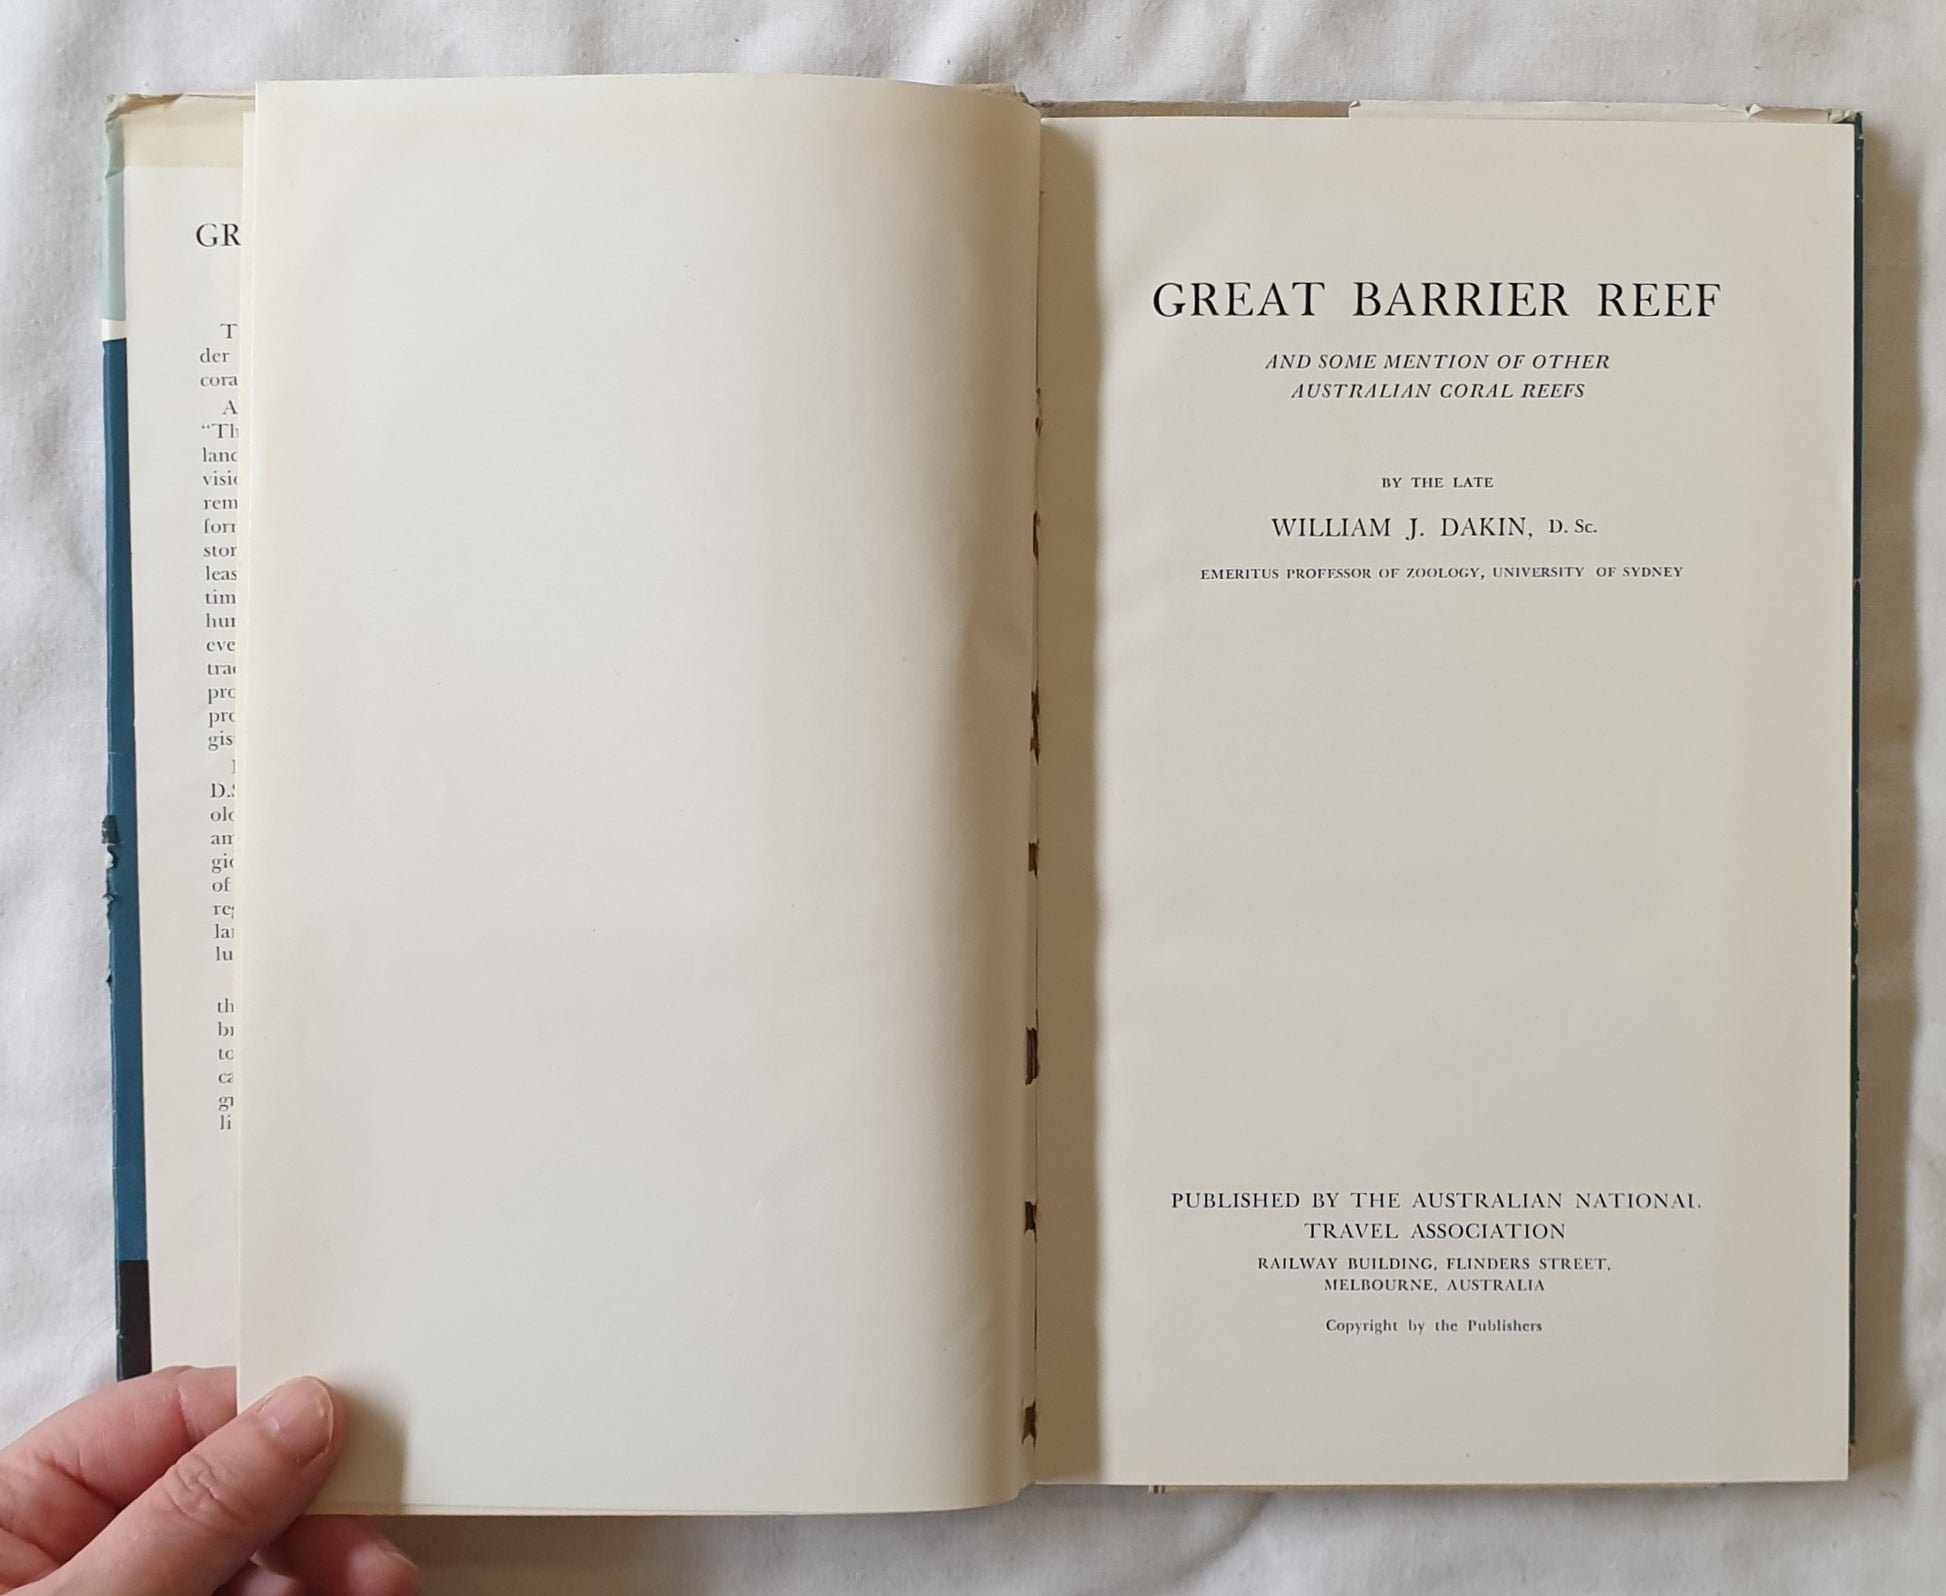 Great Barrier Reef  And Some Mention of Other Australian Coral Reefs  by William J. Dakin